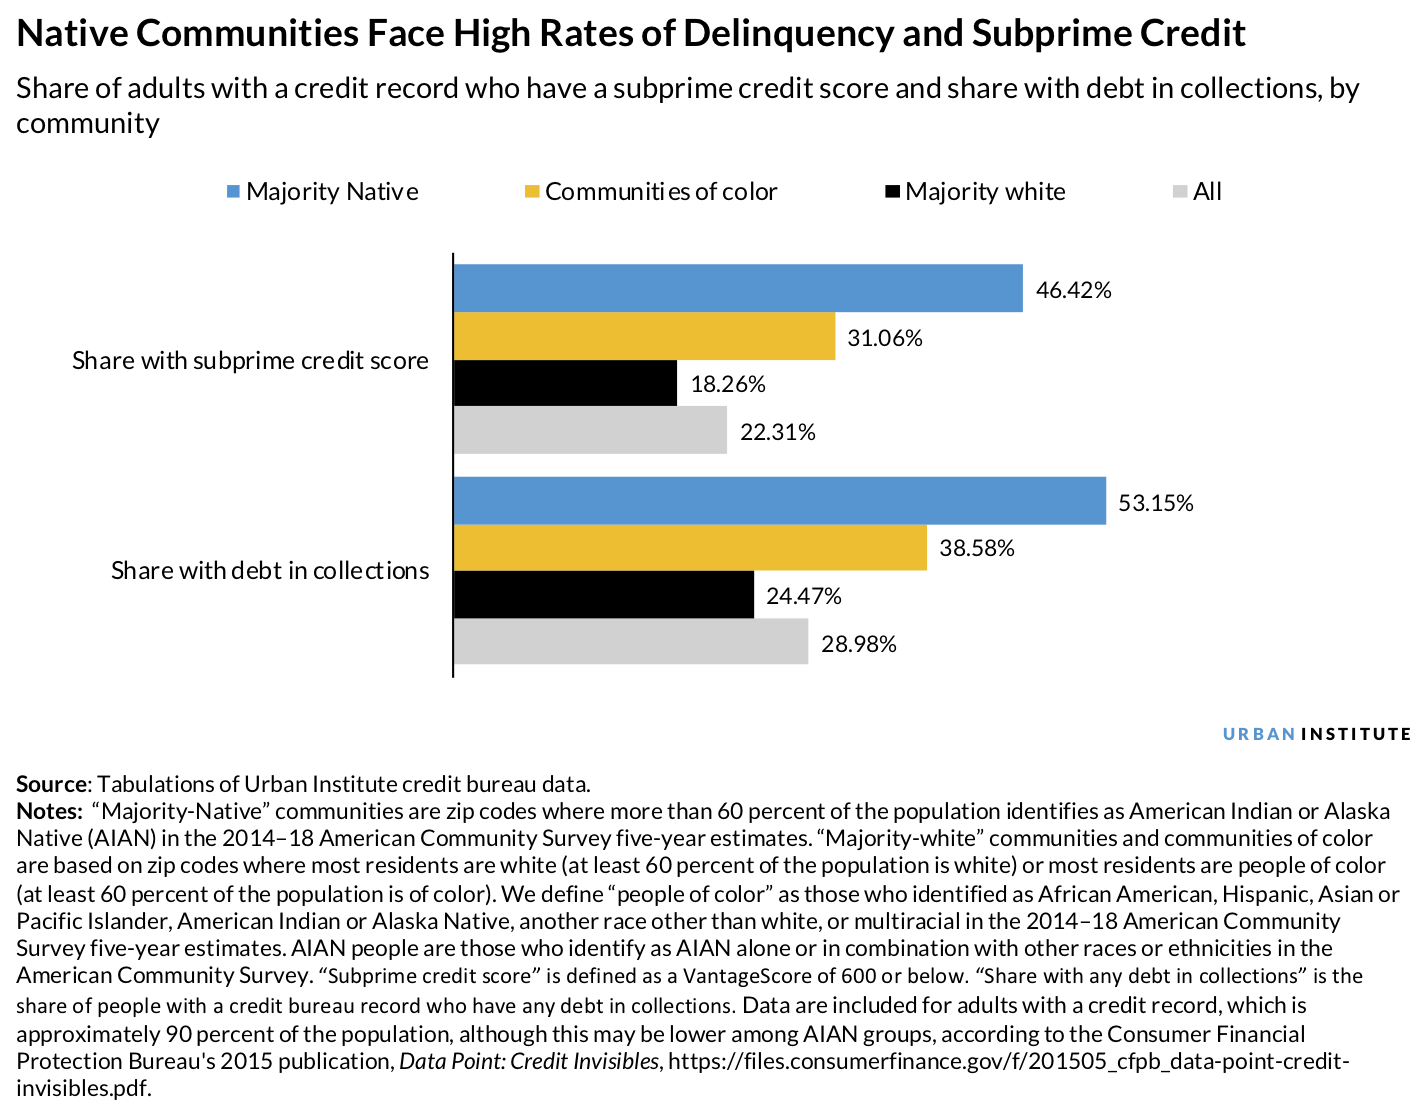 Bar chart showing Native communities face high rates of delinquency and subprime credit